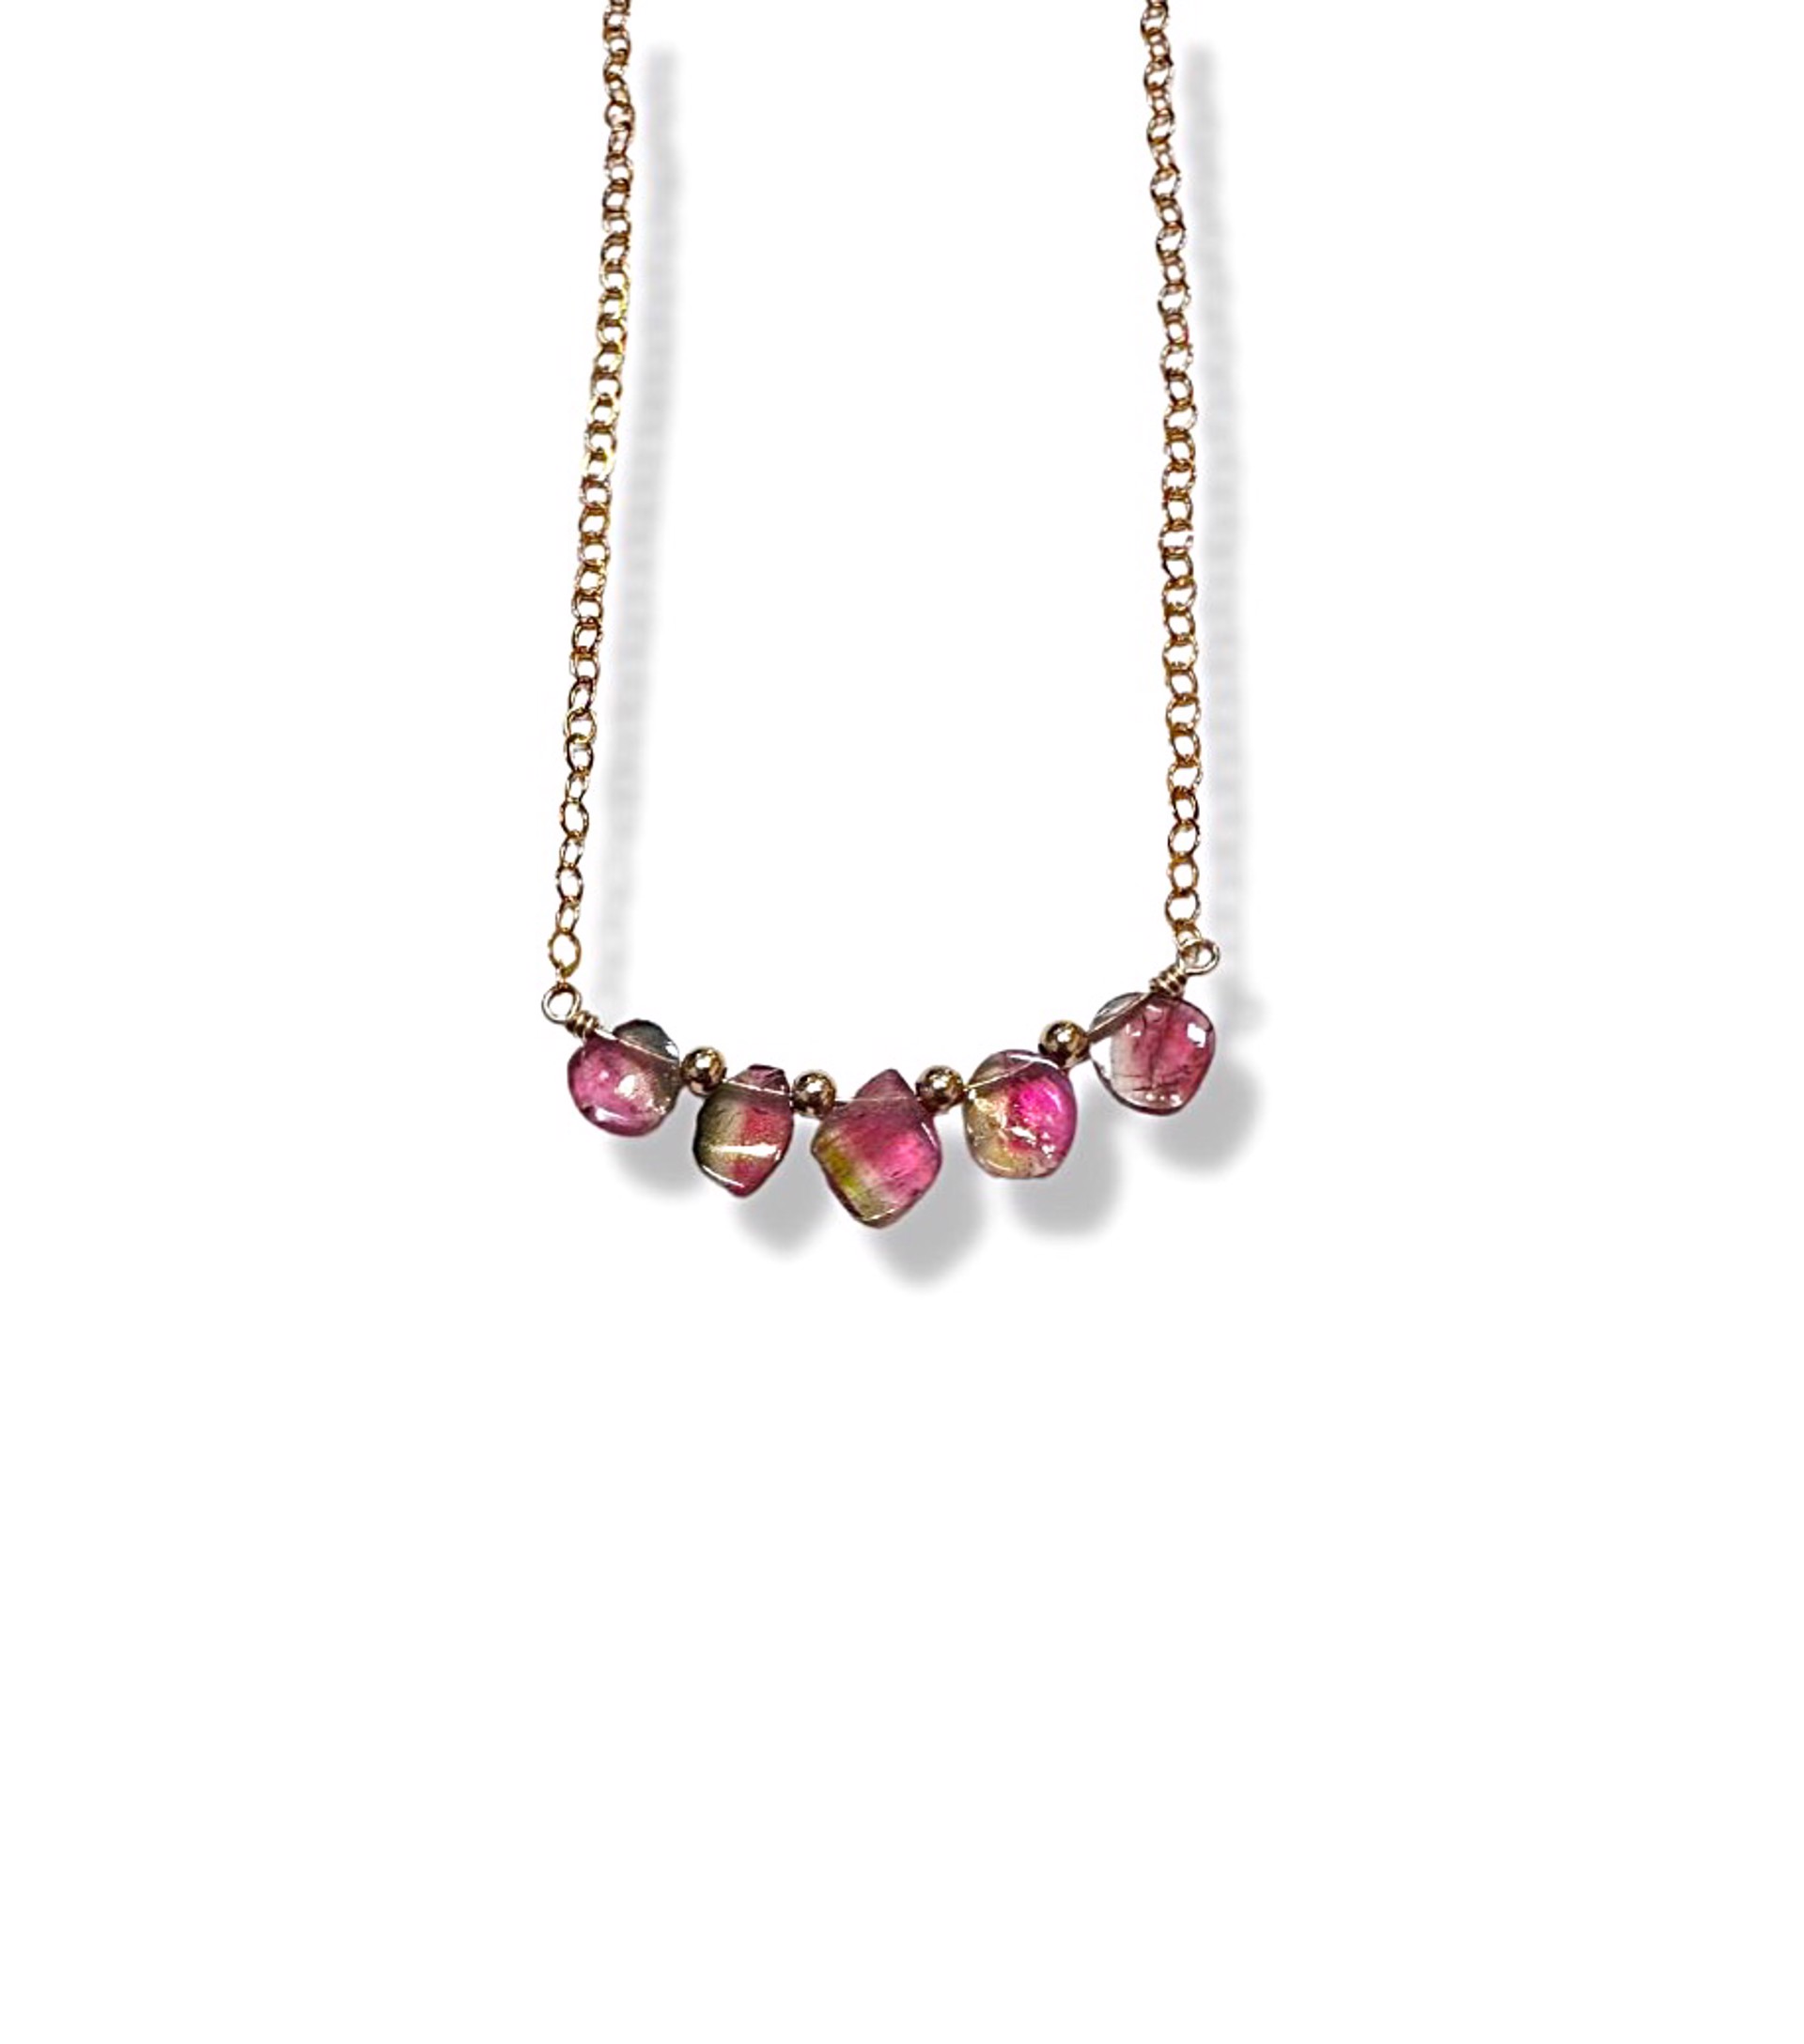 Necklace - Watermelon Tourmailine with 14K Gold Filling by Julia Balestracci